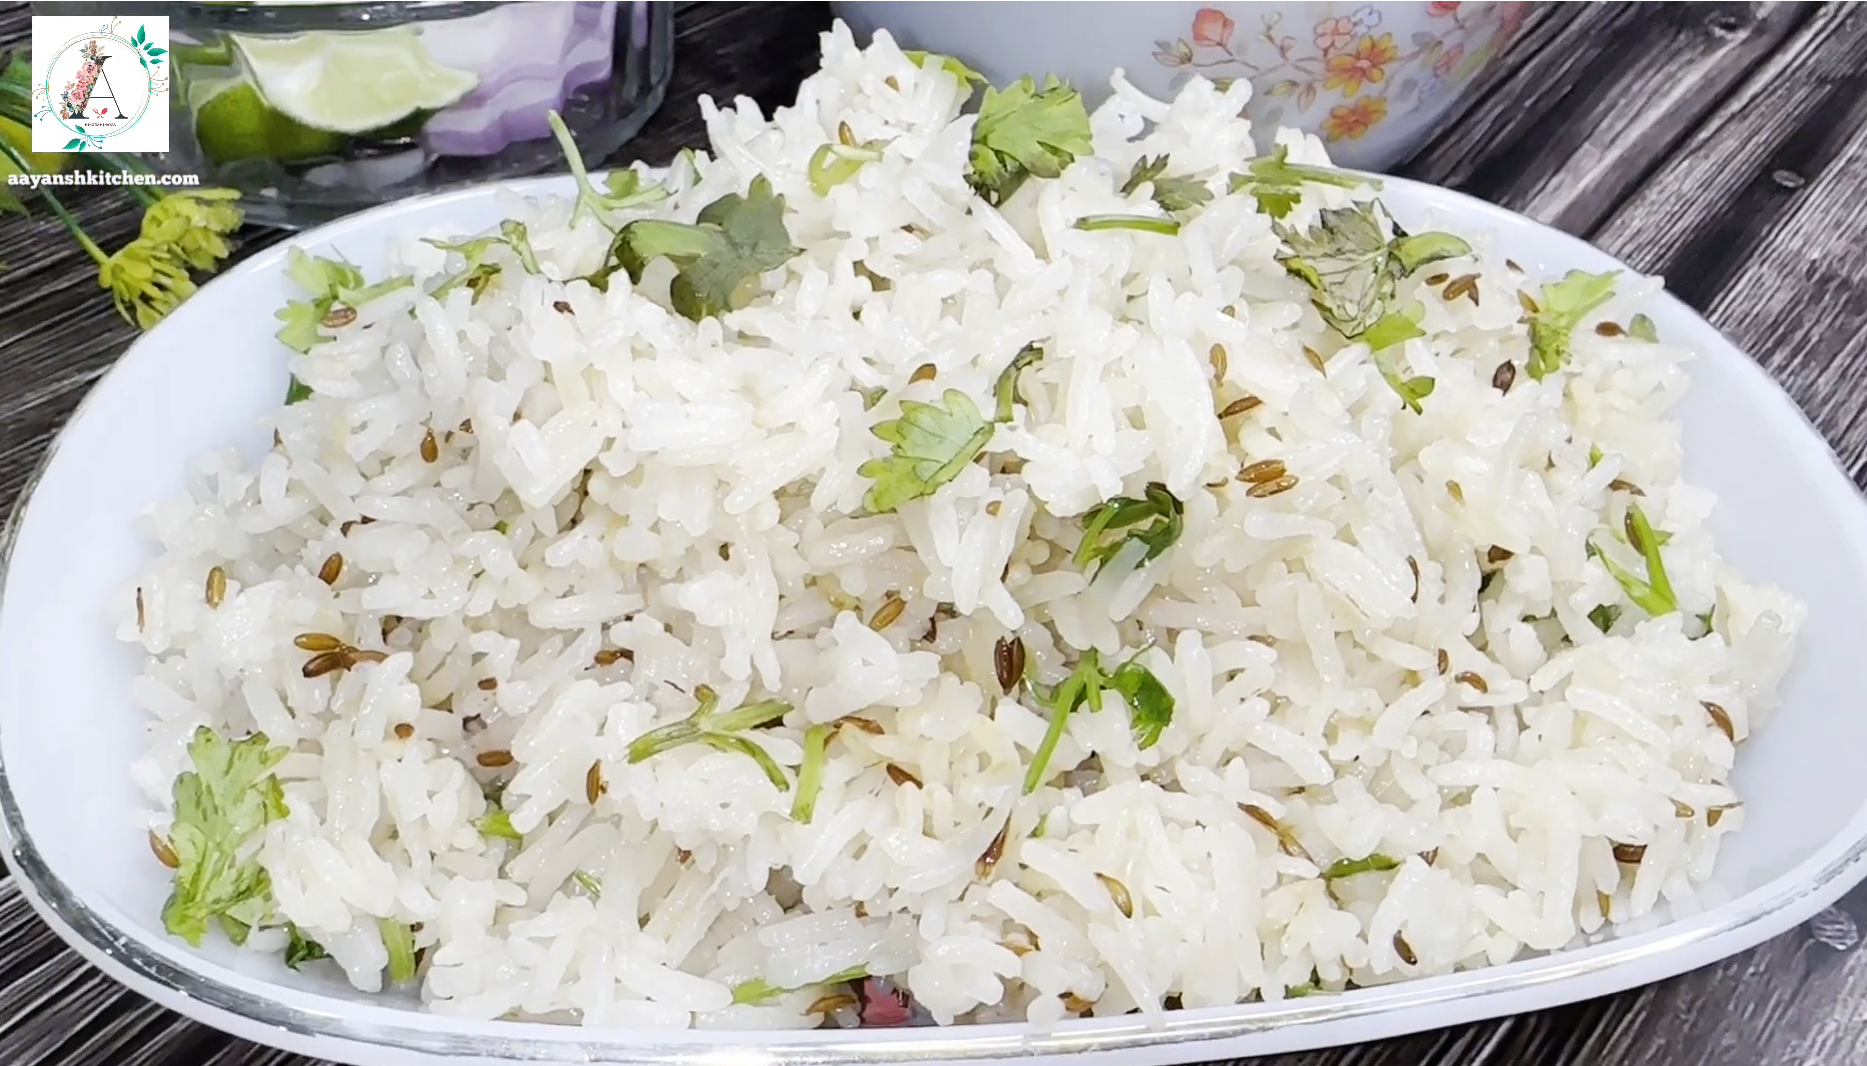 A plate of fluffy Jeera Rice garnished with fresh cilantro leaves.